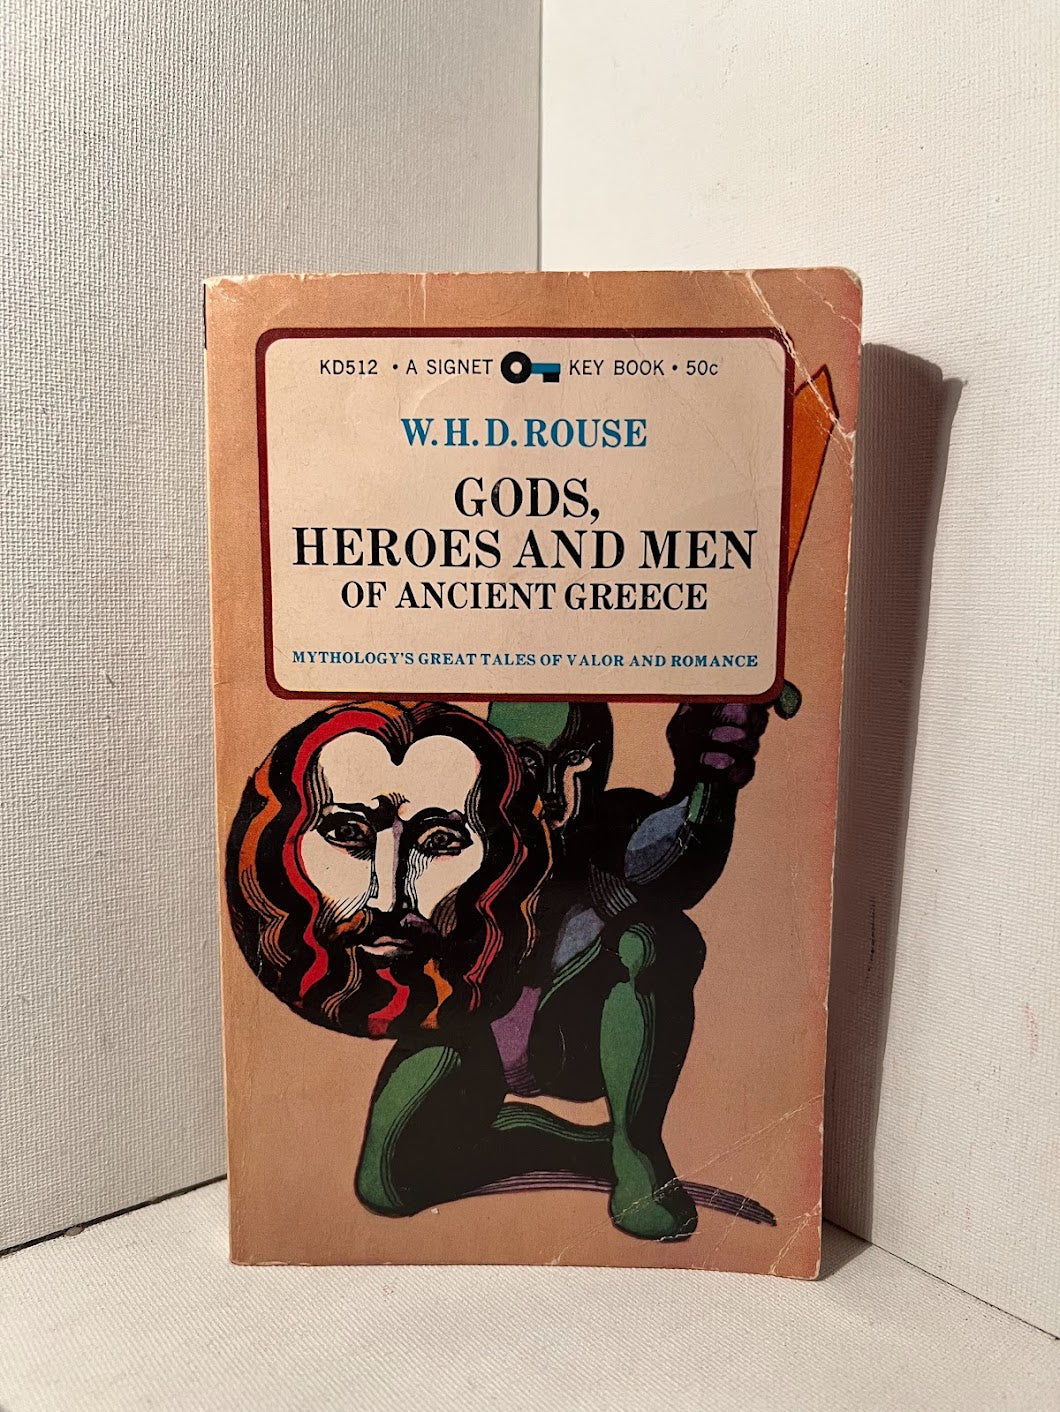 Gods, Heroes and Men of Ancient Greece by W.H.D. Rouse